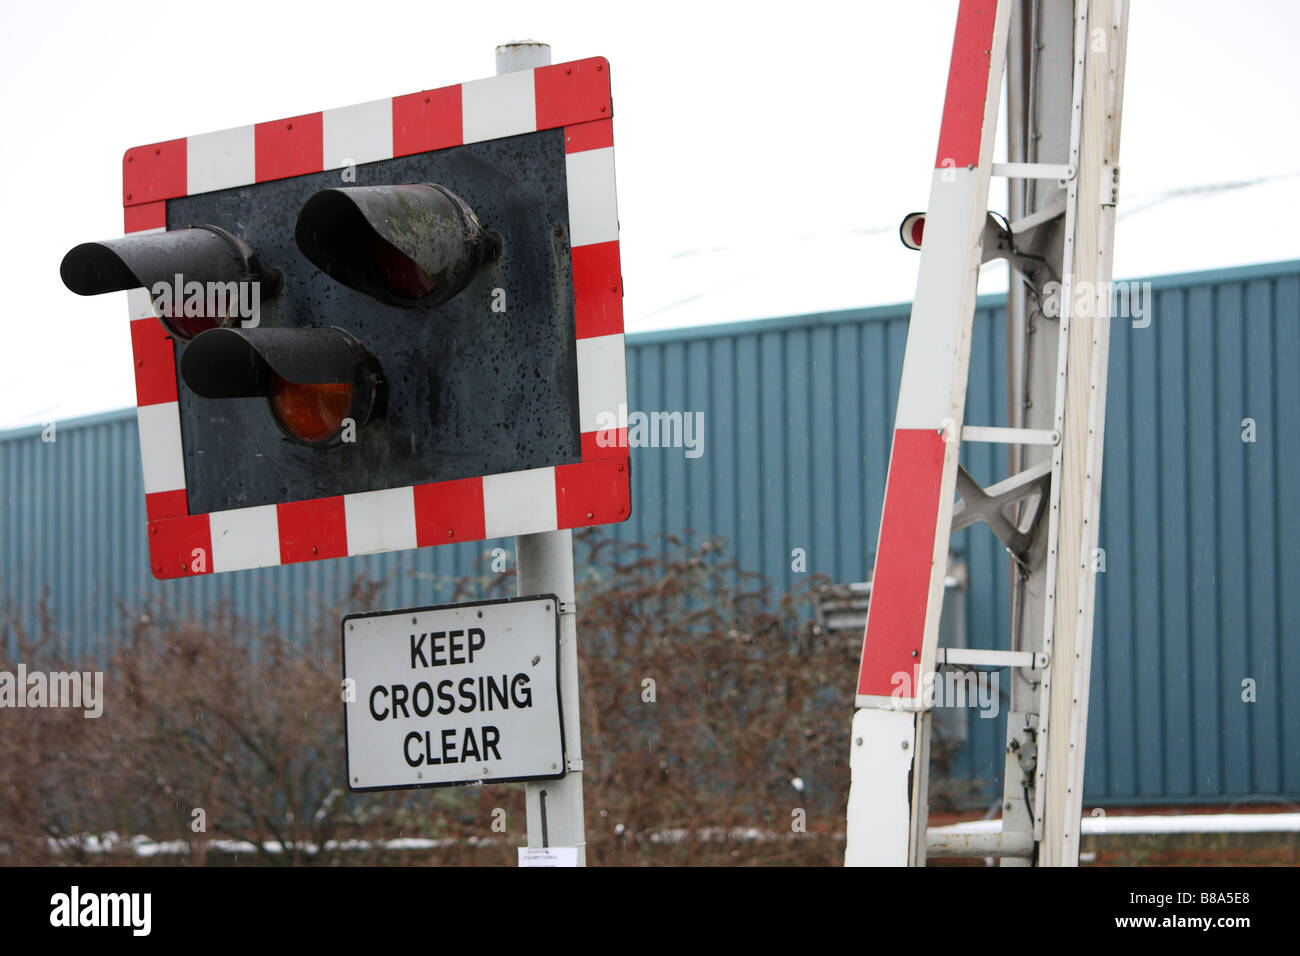 A photograph of a railway crossing lights and barrier taken from a public road Stock Photo